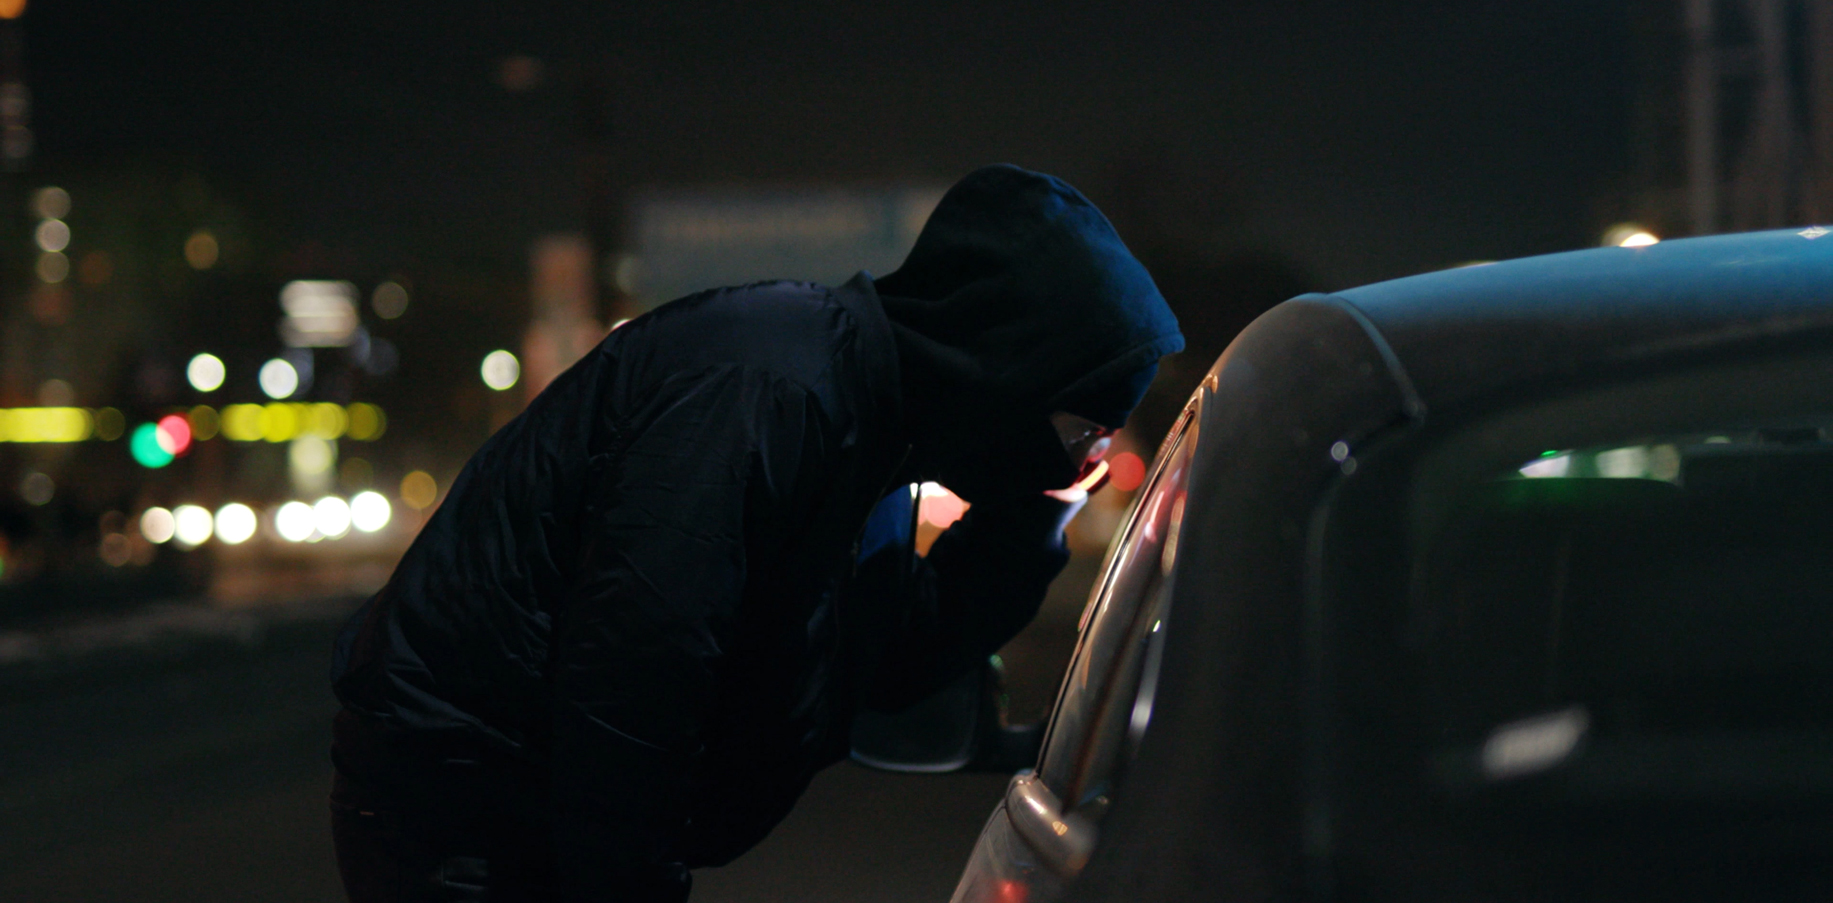 CADA joins forces to combat auto theft